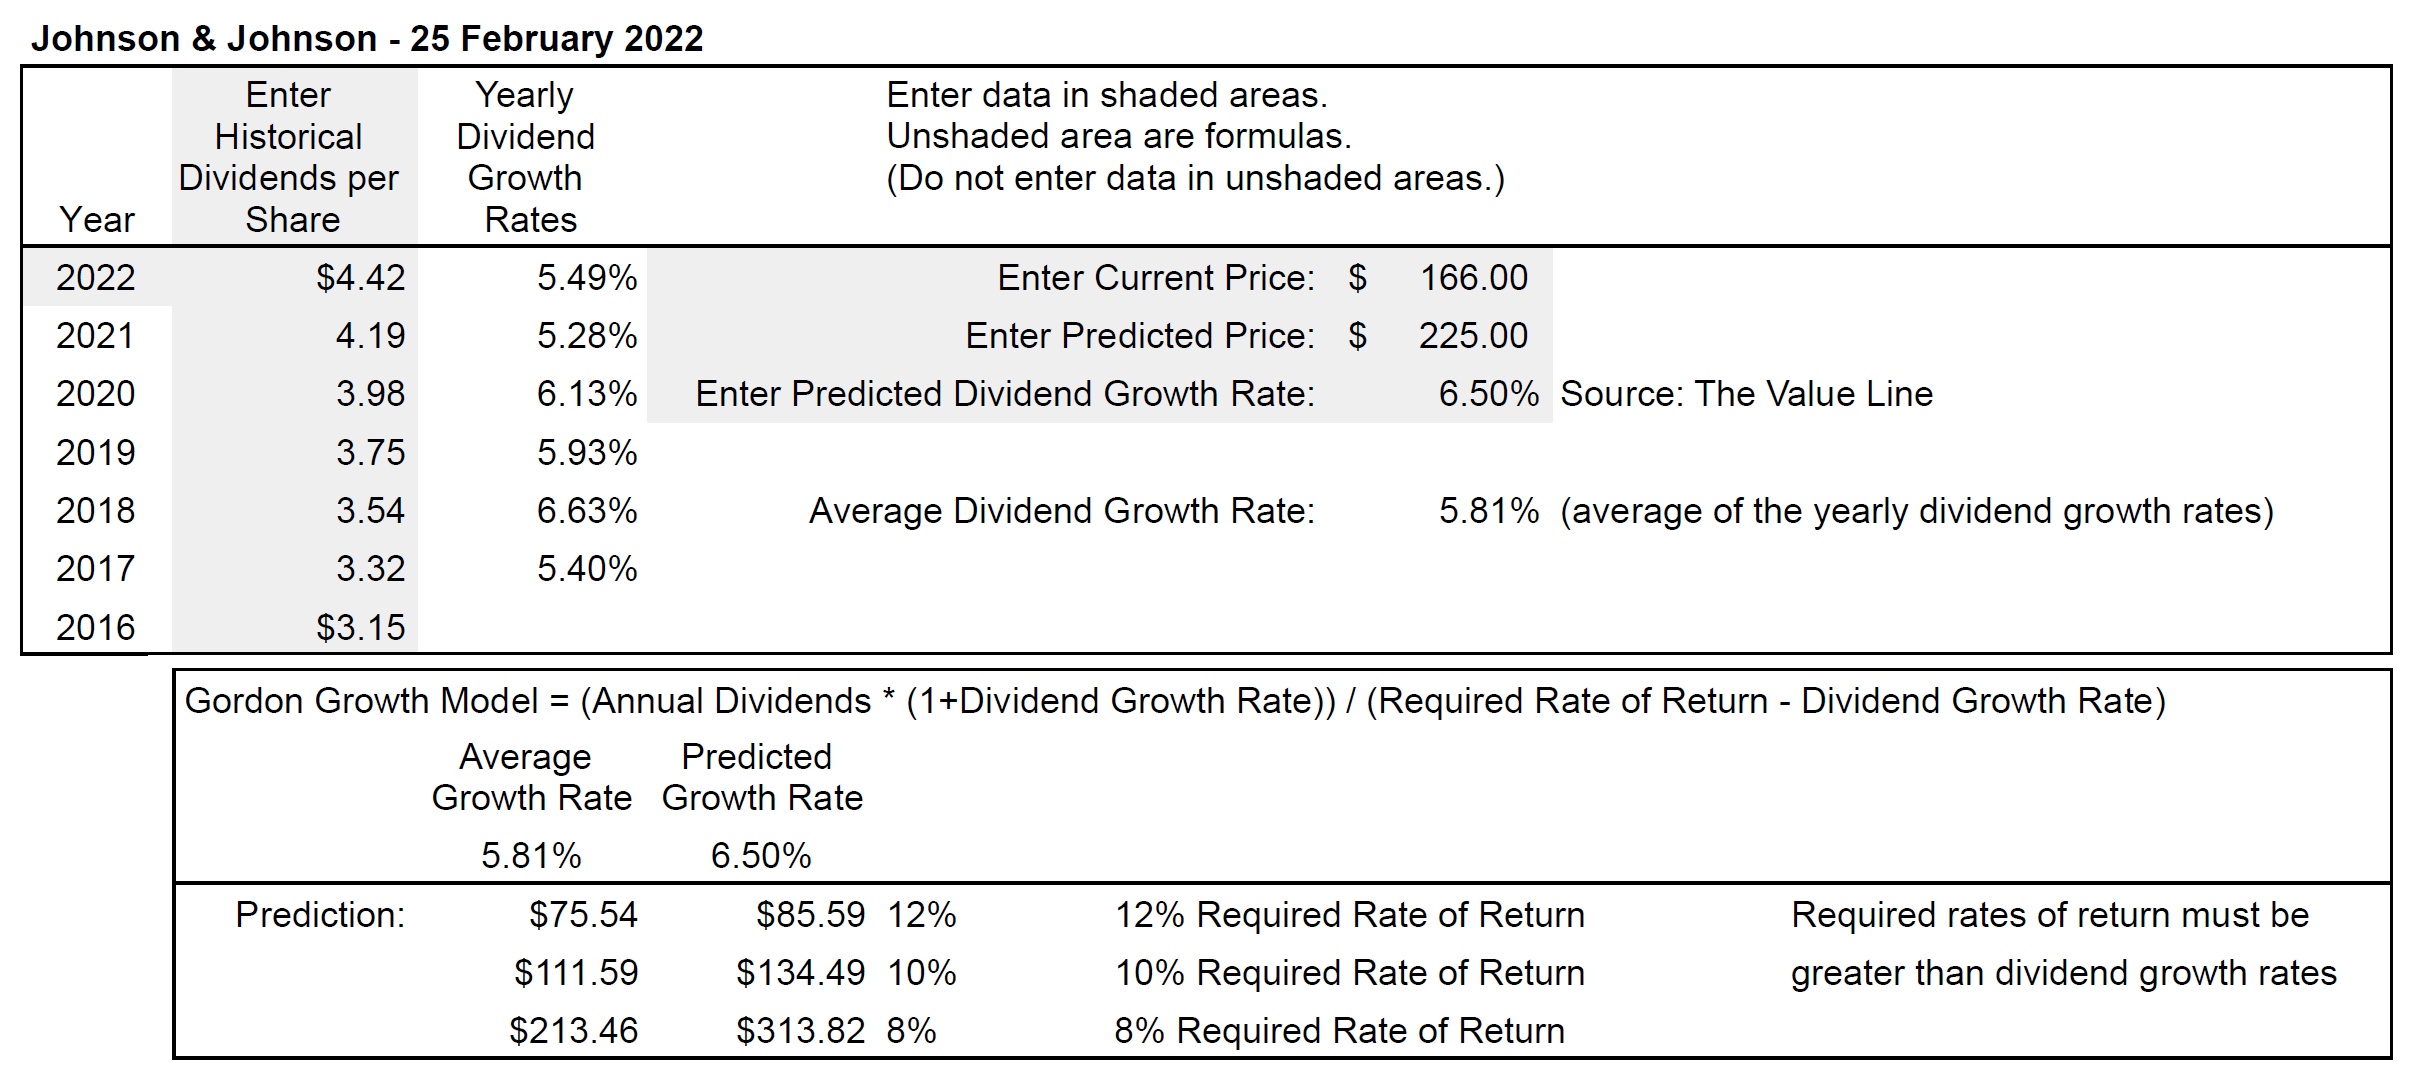 Johnson 'n' Johnson Spreadsheet using The Value Line data to compute the Gordon Growth Model Valuations